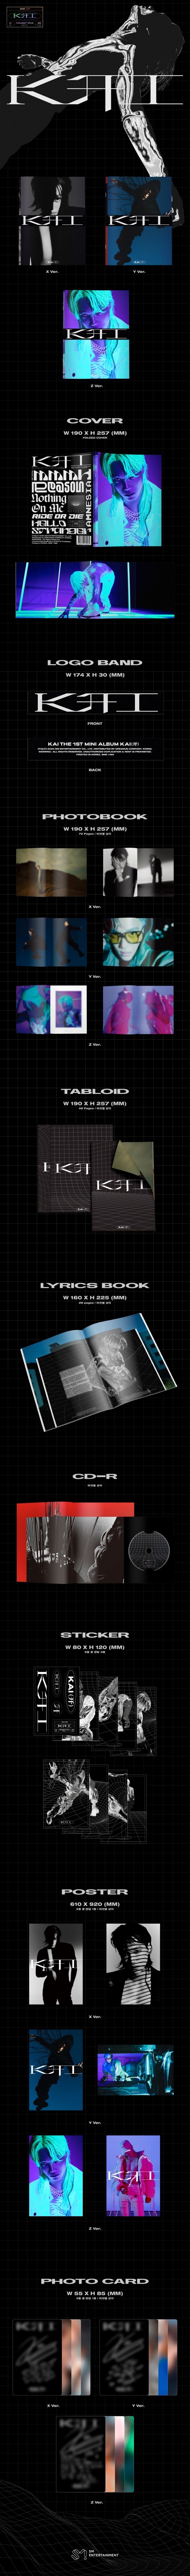 1 CD
1 Photo Book (72 pages)
48 Tabloids
28 Lyrics
3 Stickers
1 Card